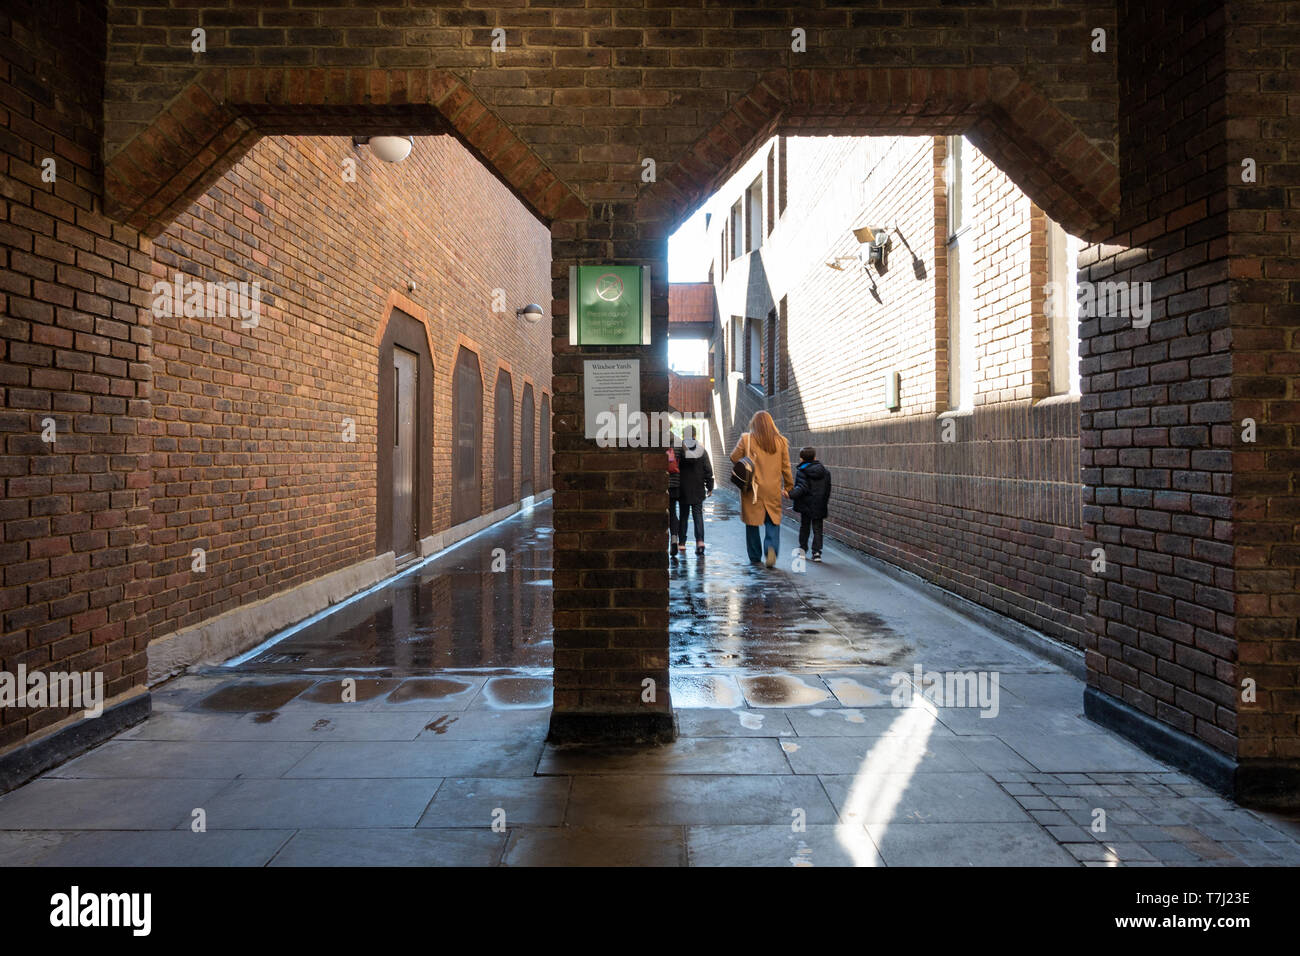 A couple of brick built archways in Windsor, UK are an interesting focal point. Stock Photo